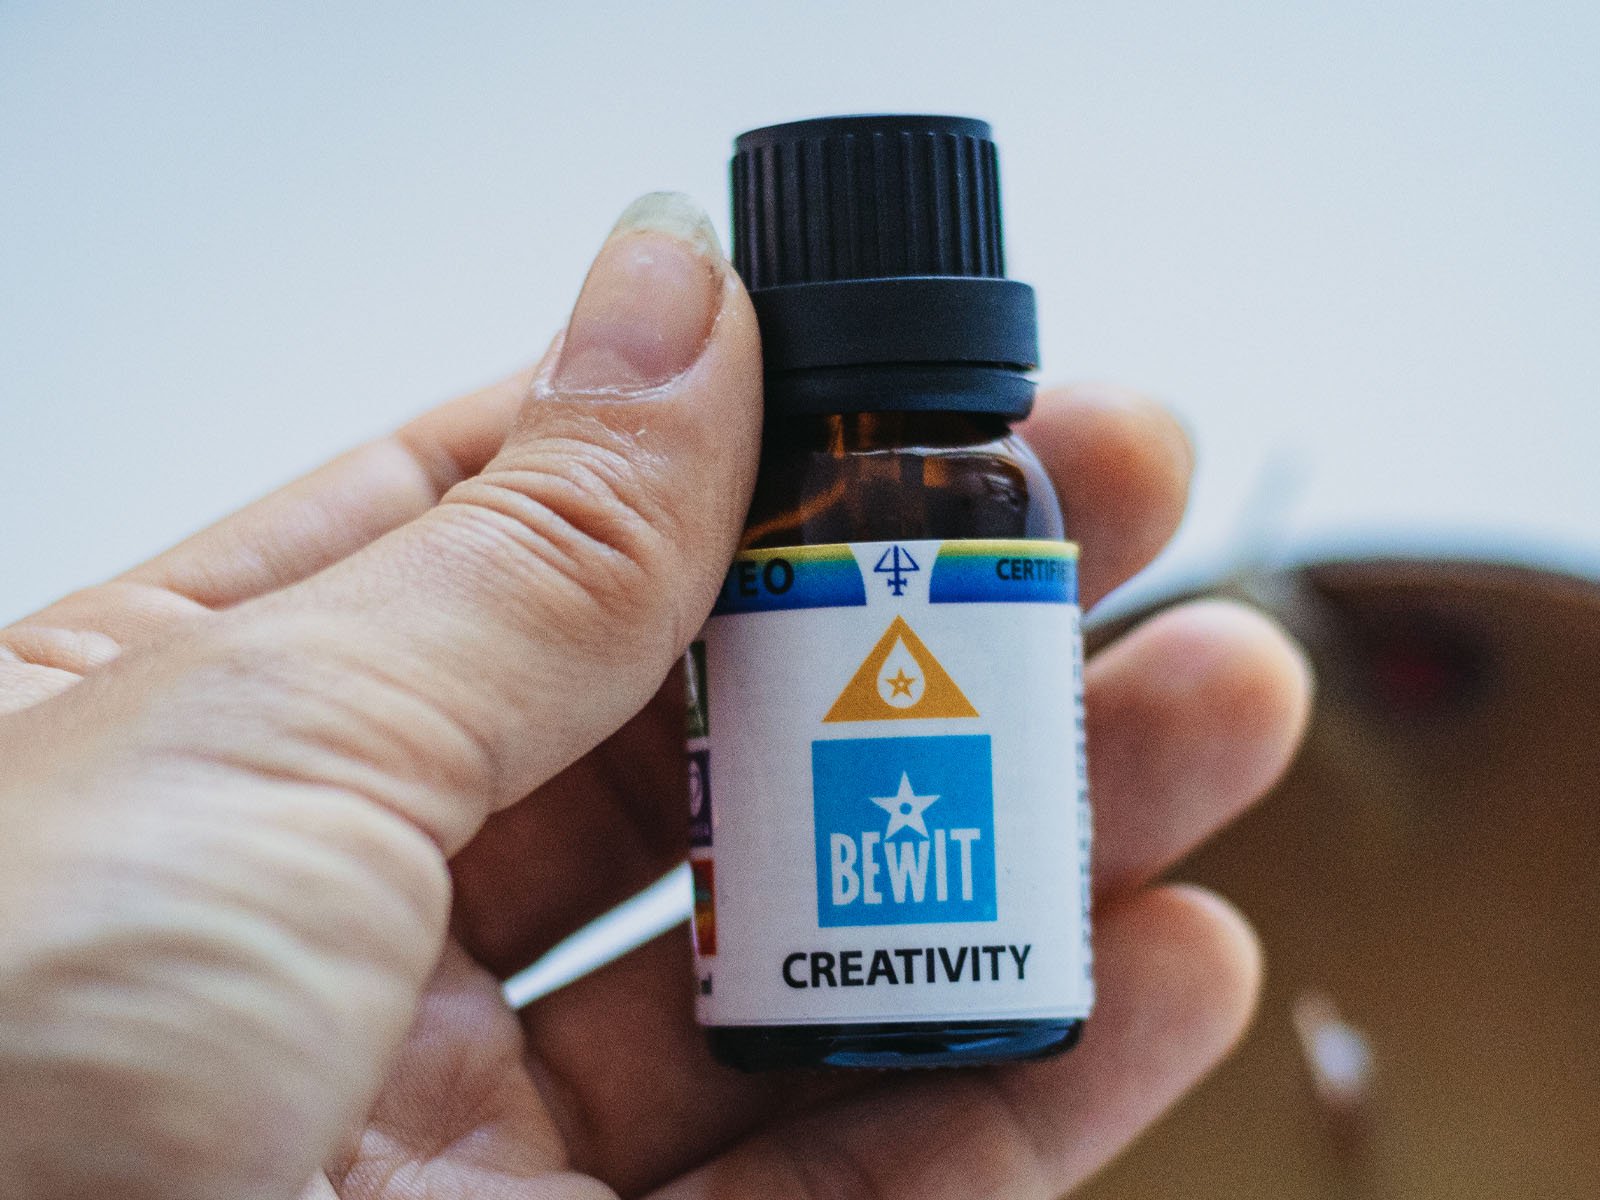 BEWIT CREATIVITY - This is a unique blend of the essential oils - 7